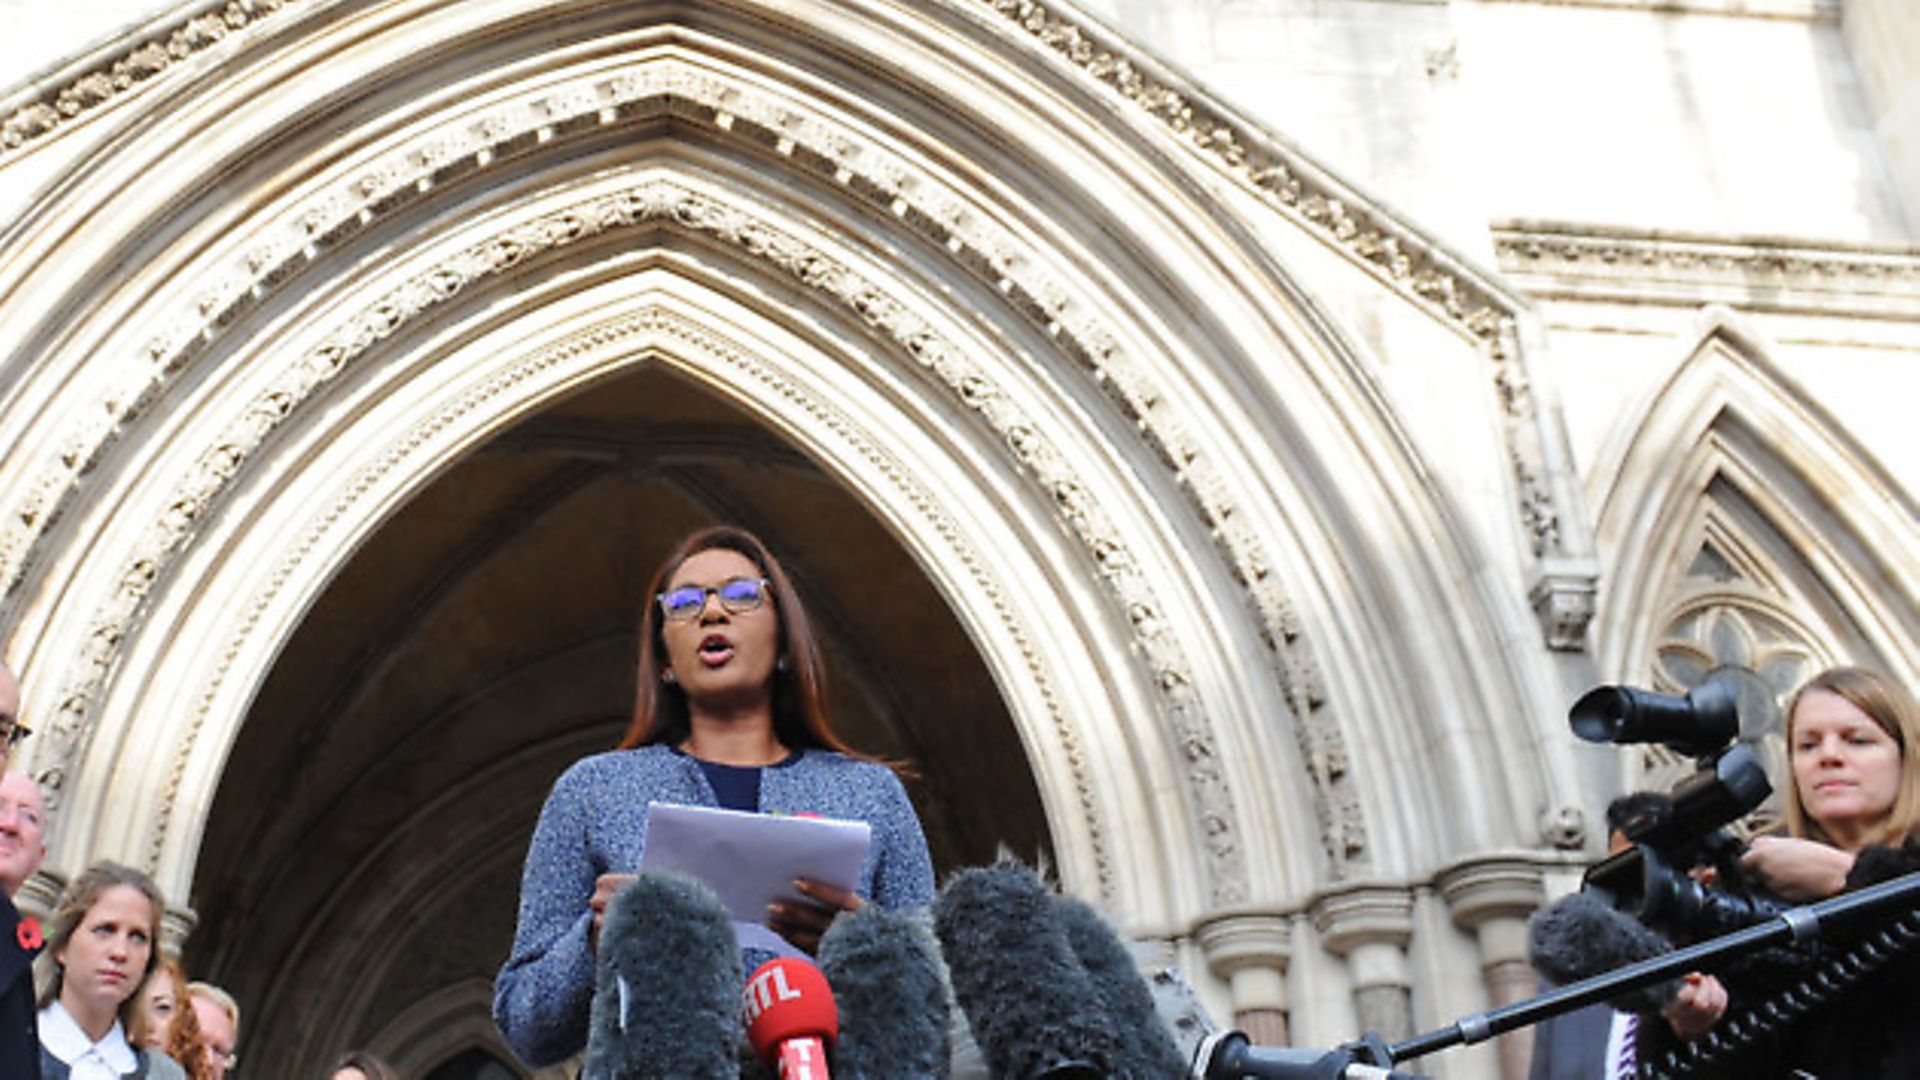 Gina Miller speaks to the media at the High Court in London - Credit: PA Wire/PA Images